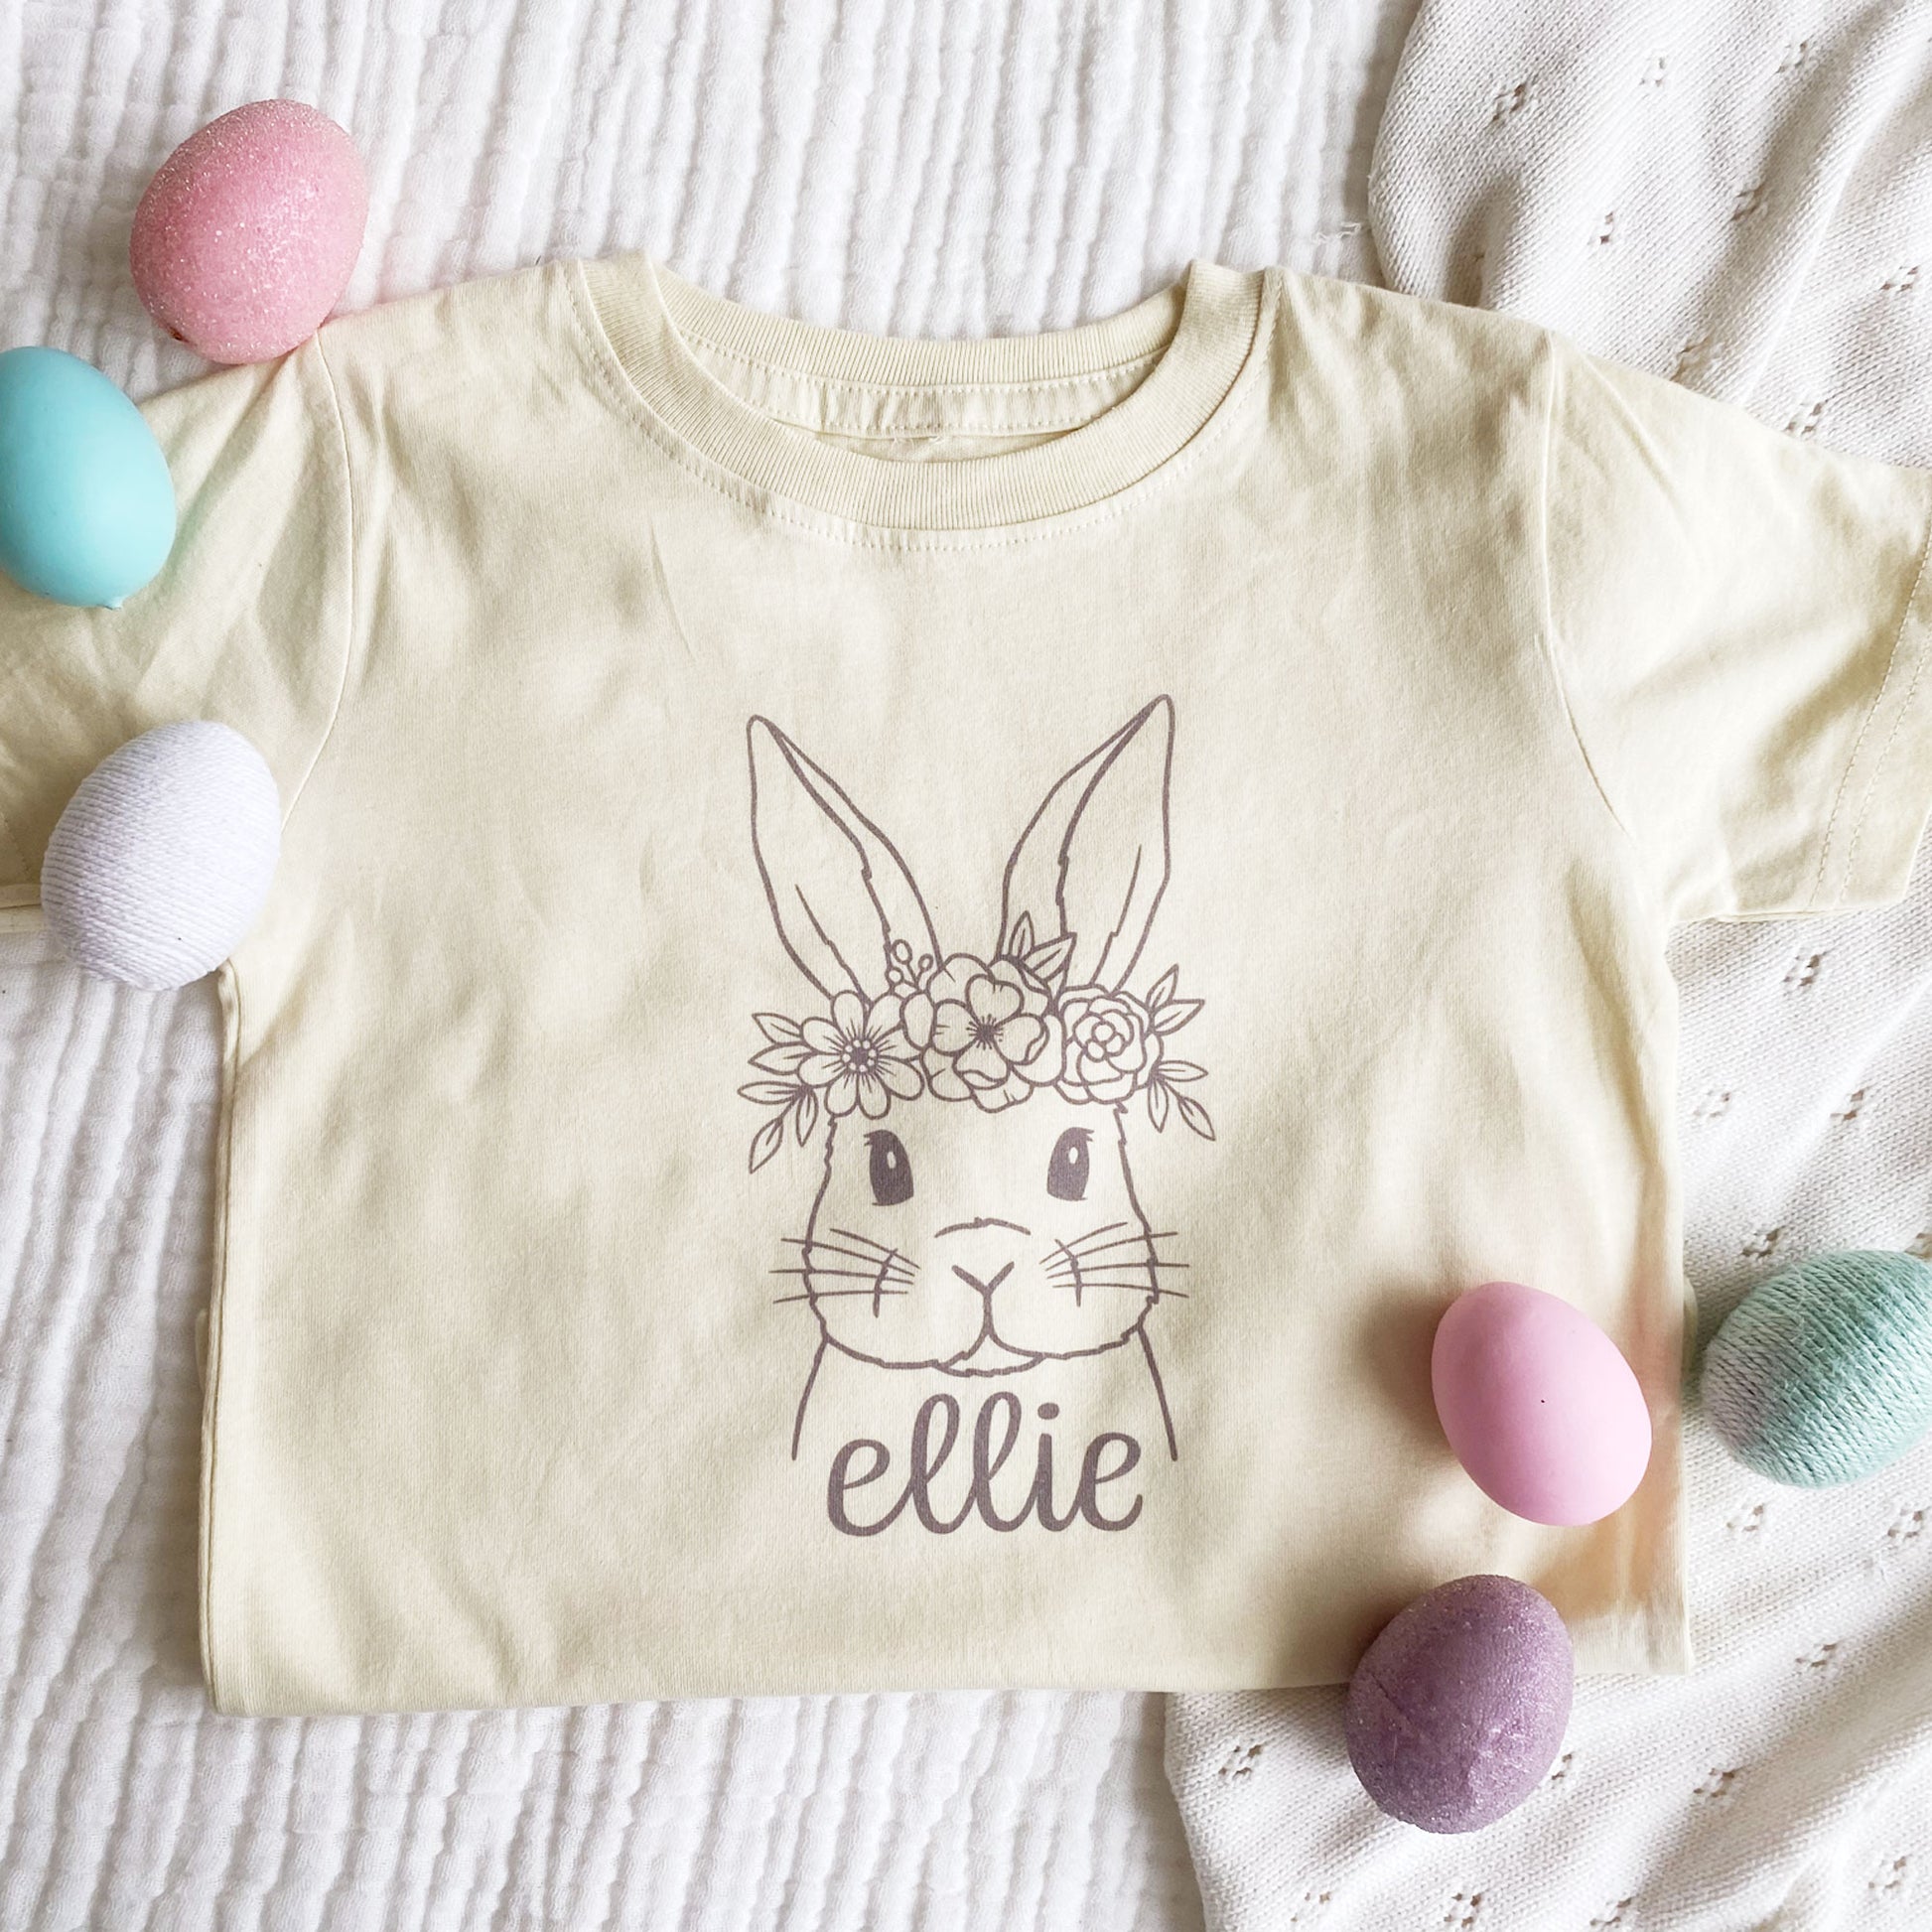 natural colored t-shirt with a bunny with a flower crown and personalized name printed on the front